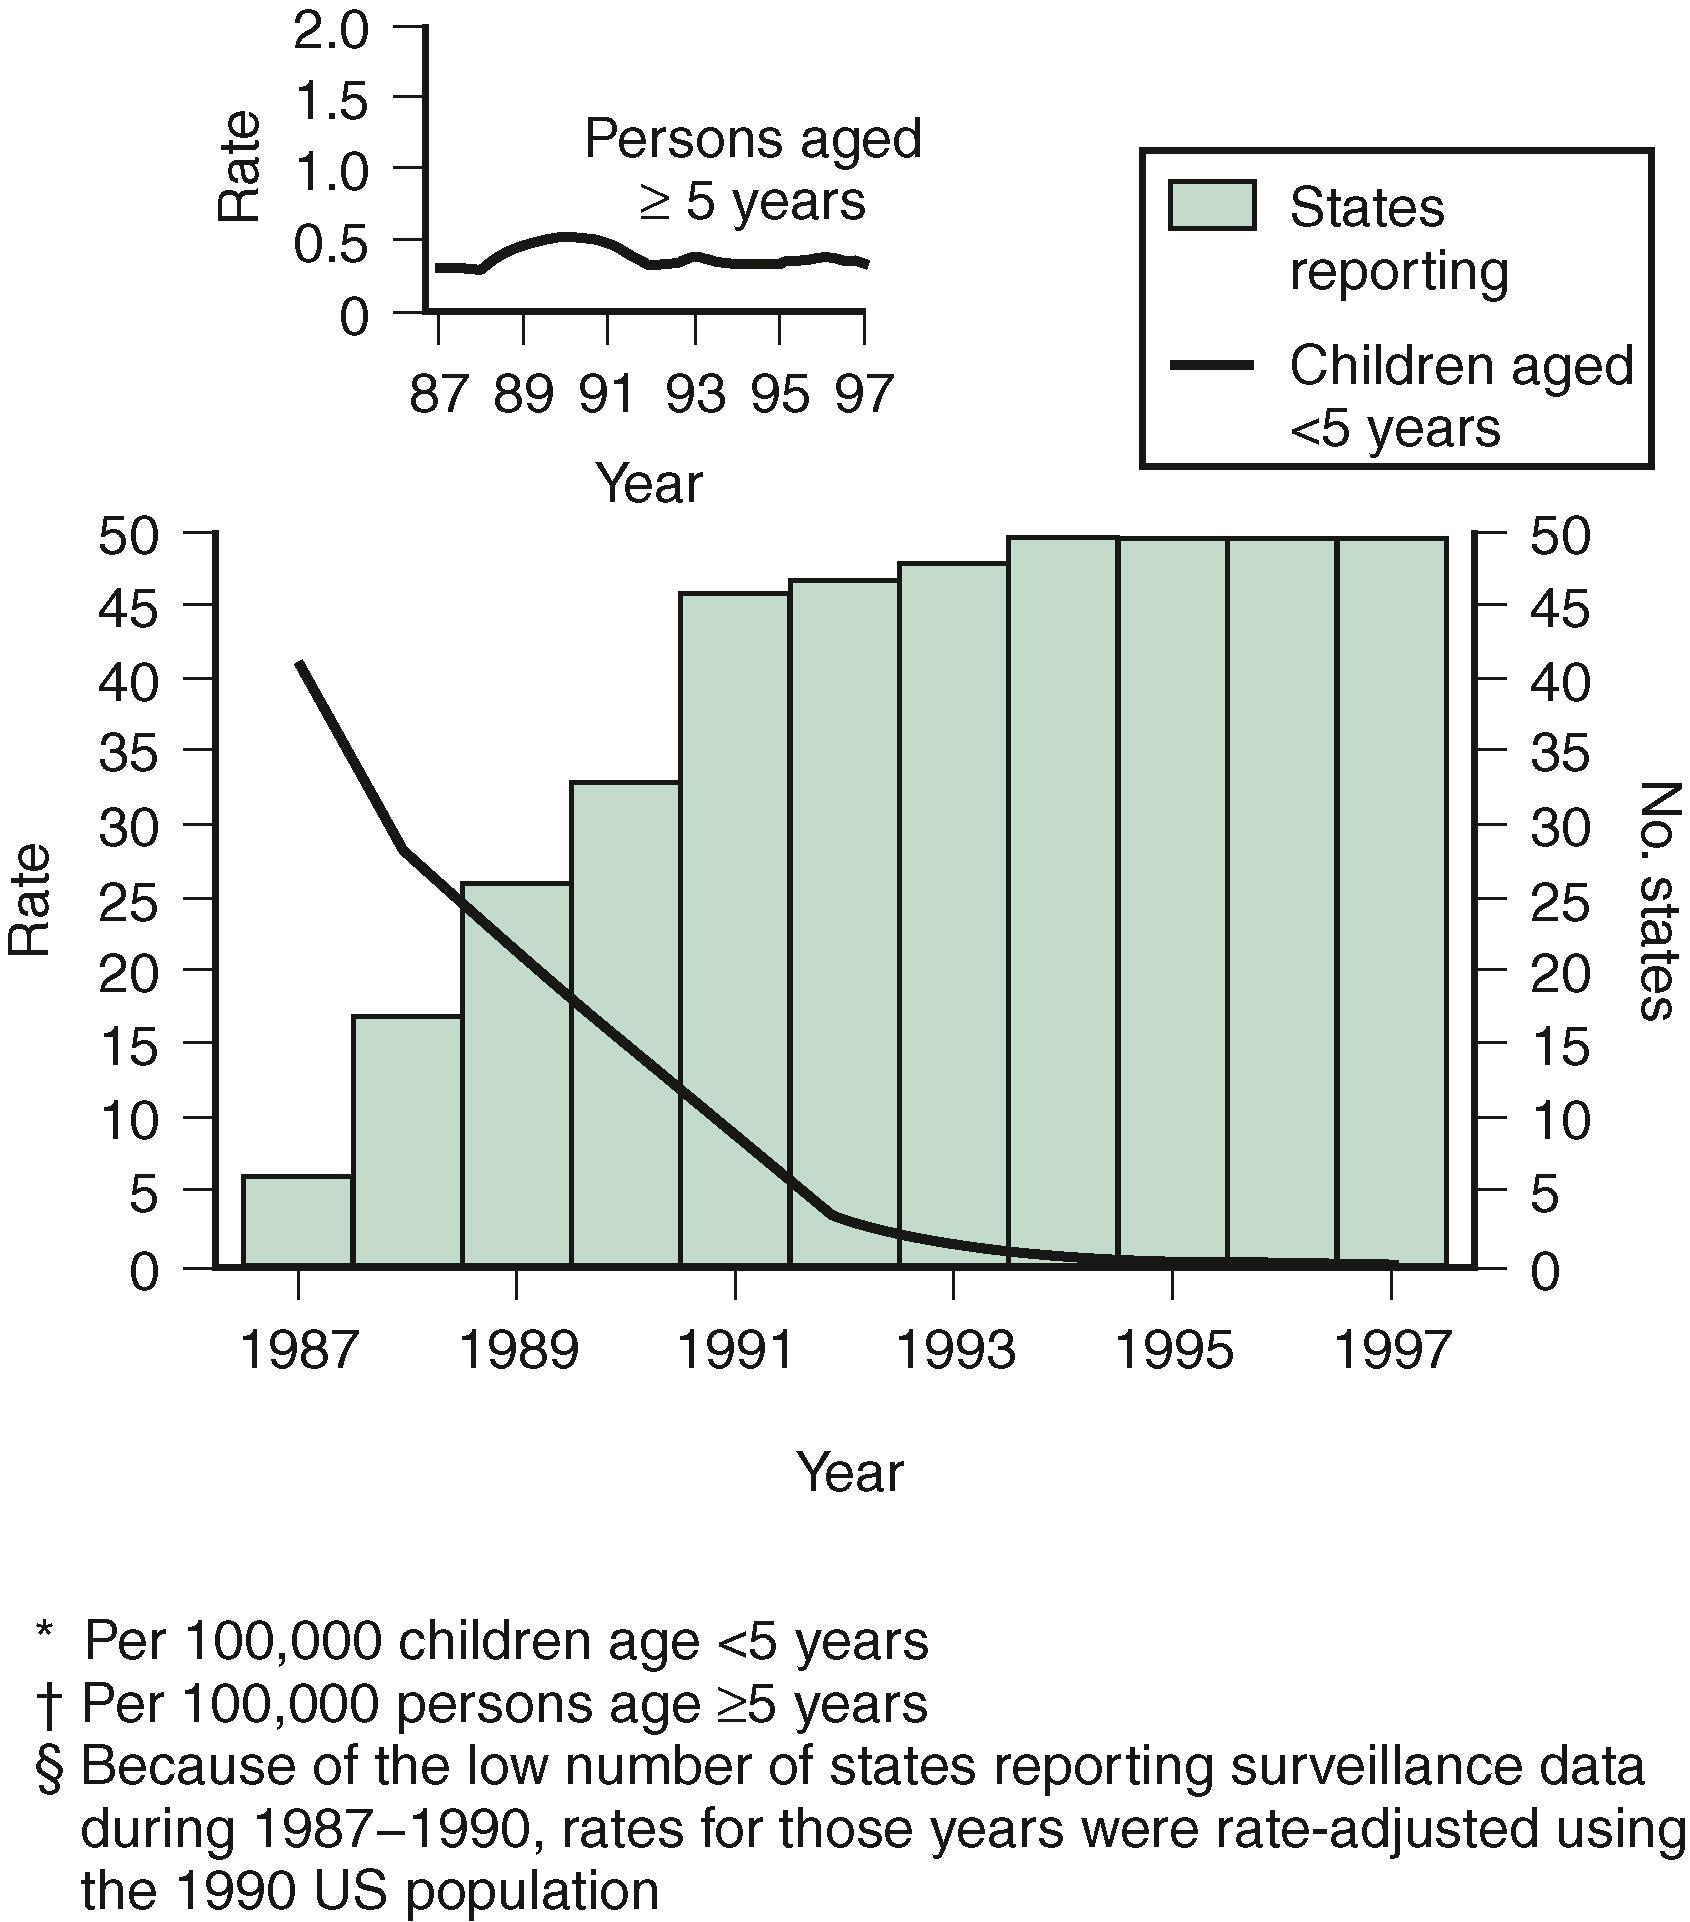 Figure 40.1, Incidence ∗§ per 100,000 of invasive Haemophilus influenzae disease among children younger than 5 years †§ in the US and the number of states reporting H. influenzae surveillance data to the National Notifiable Diseases Surveillance System, 1987–1997. § Insert represents the incidence of invasive H. influenzae disease among persons 5 years or older.